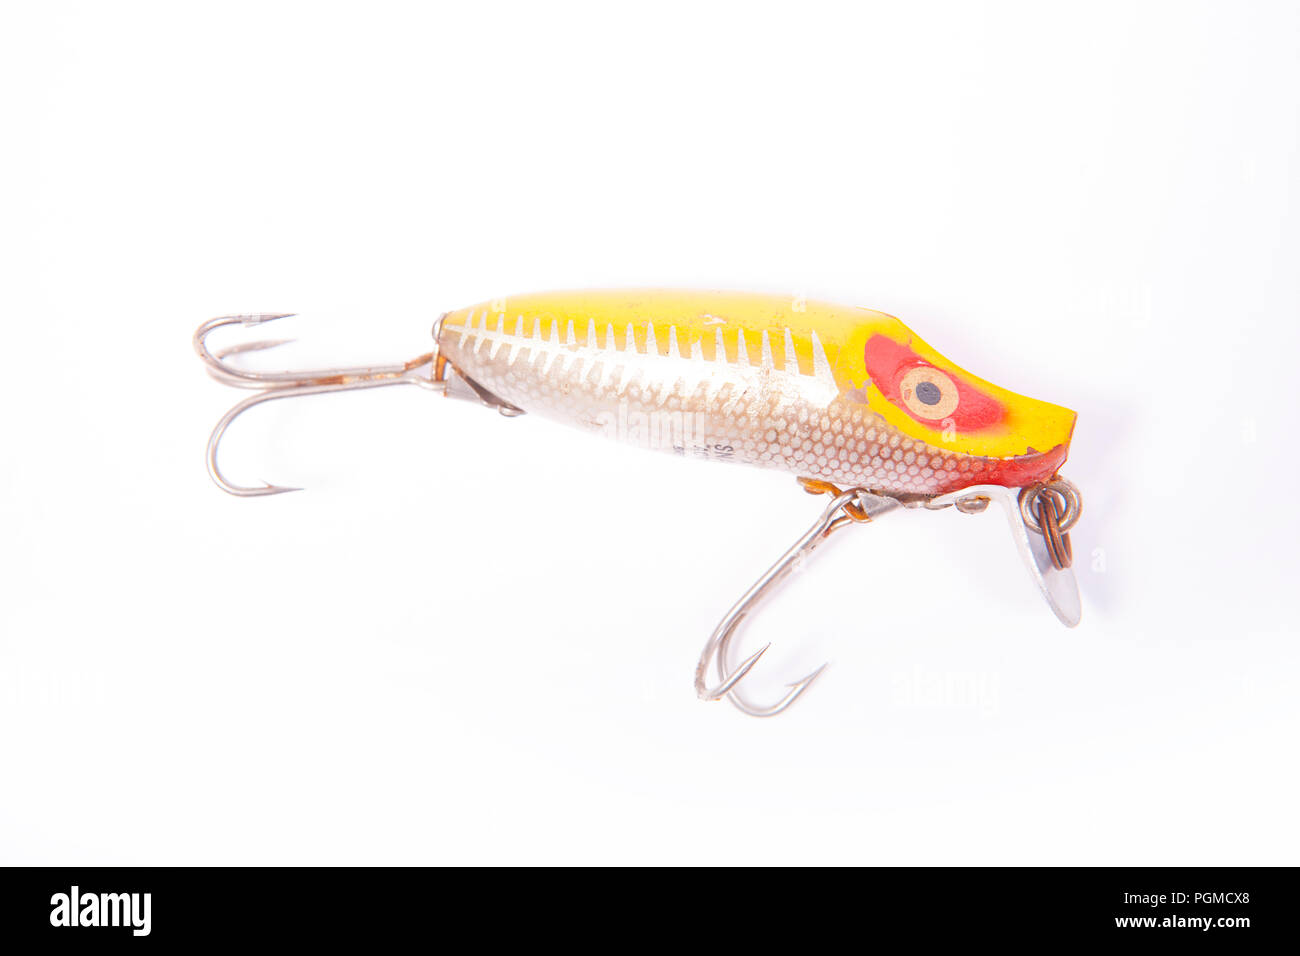 A British Snapdragon fishing lure, or plug, designed for catching predatory fish. From a collection of vintage and modern fishing tackle. North Dorset Stock Photo